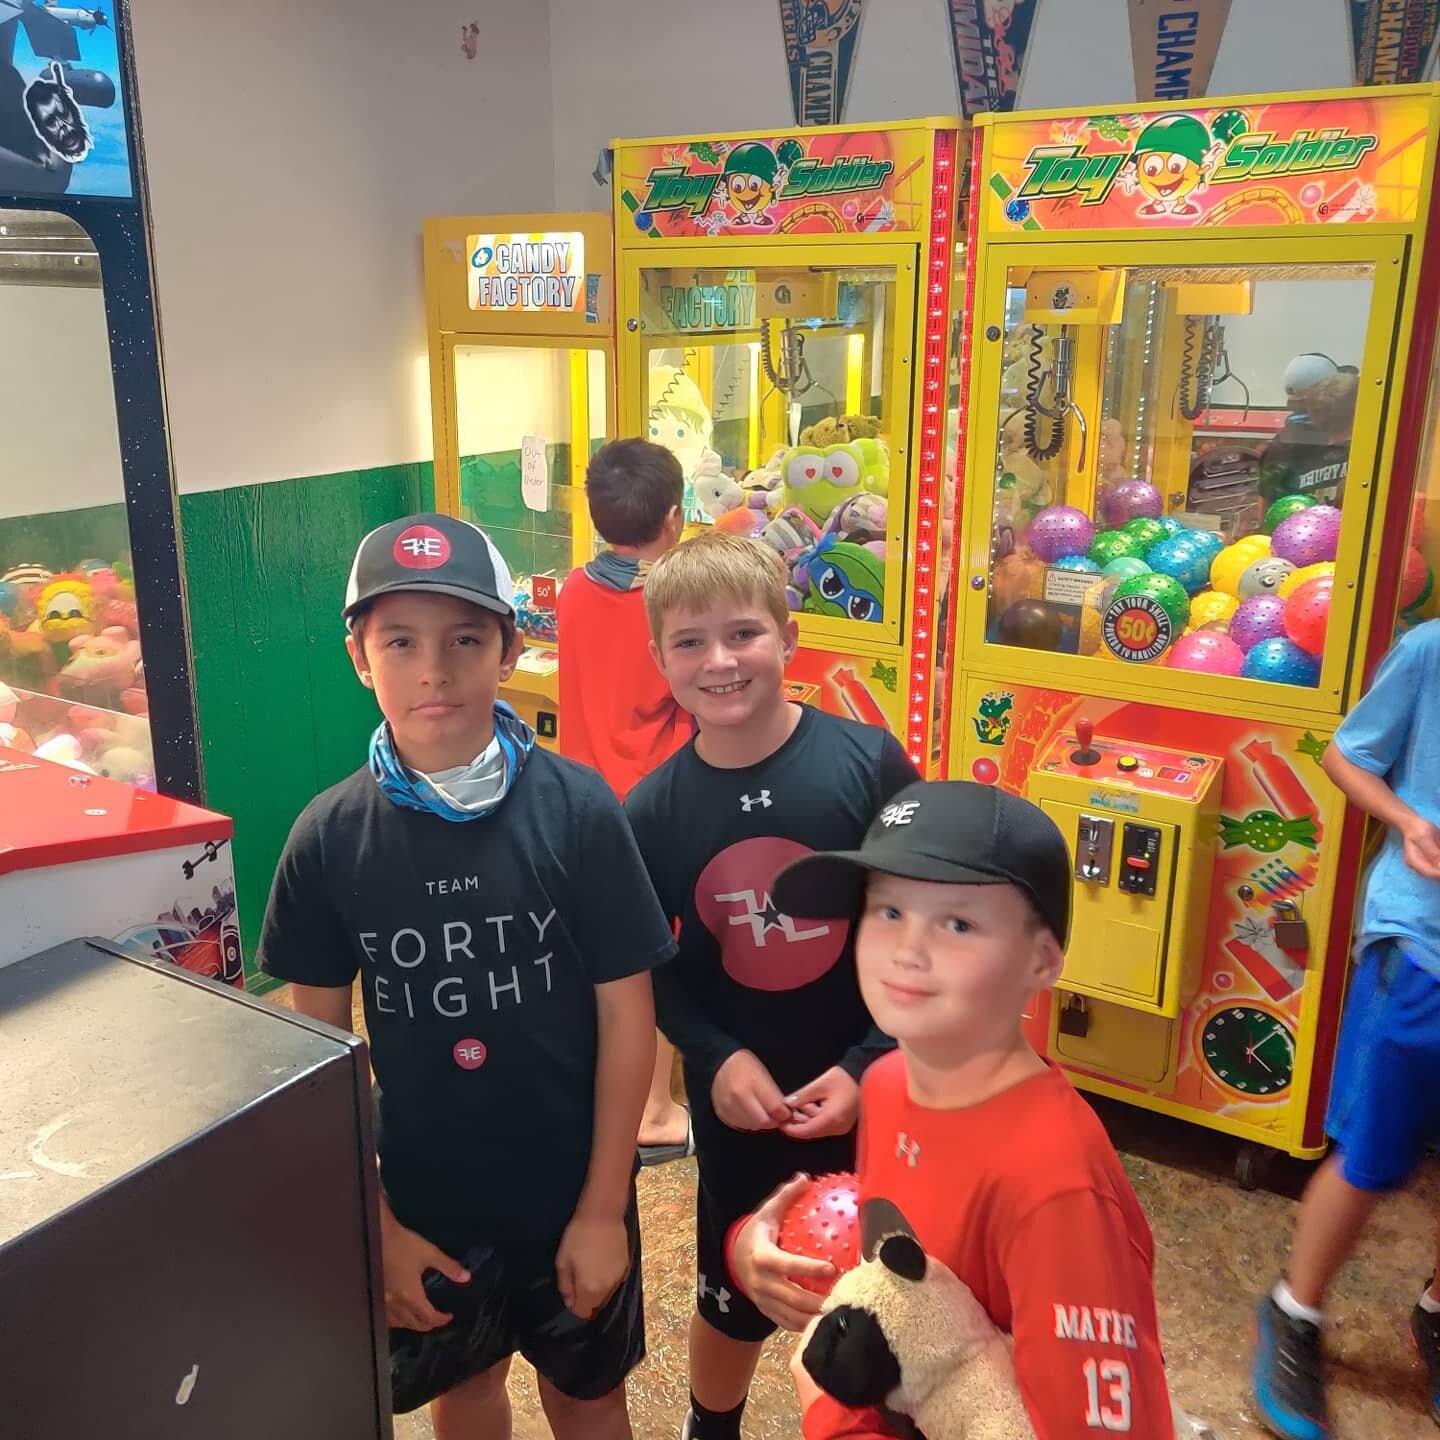 #48familyfridays #culture
The 29/30 team had a pizza party both tournament weekends! 
The boys worked just as hard to get their gold chains from the claw machine as they did on the field that day 🤣
Seeing all the boys show up on Sunday mornings with